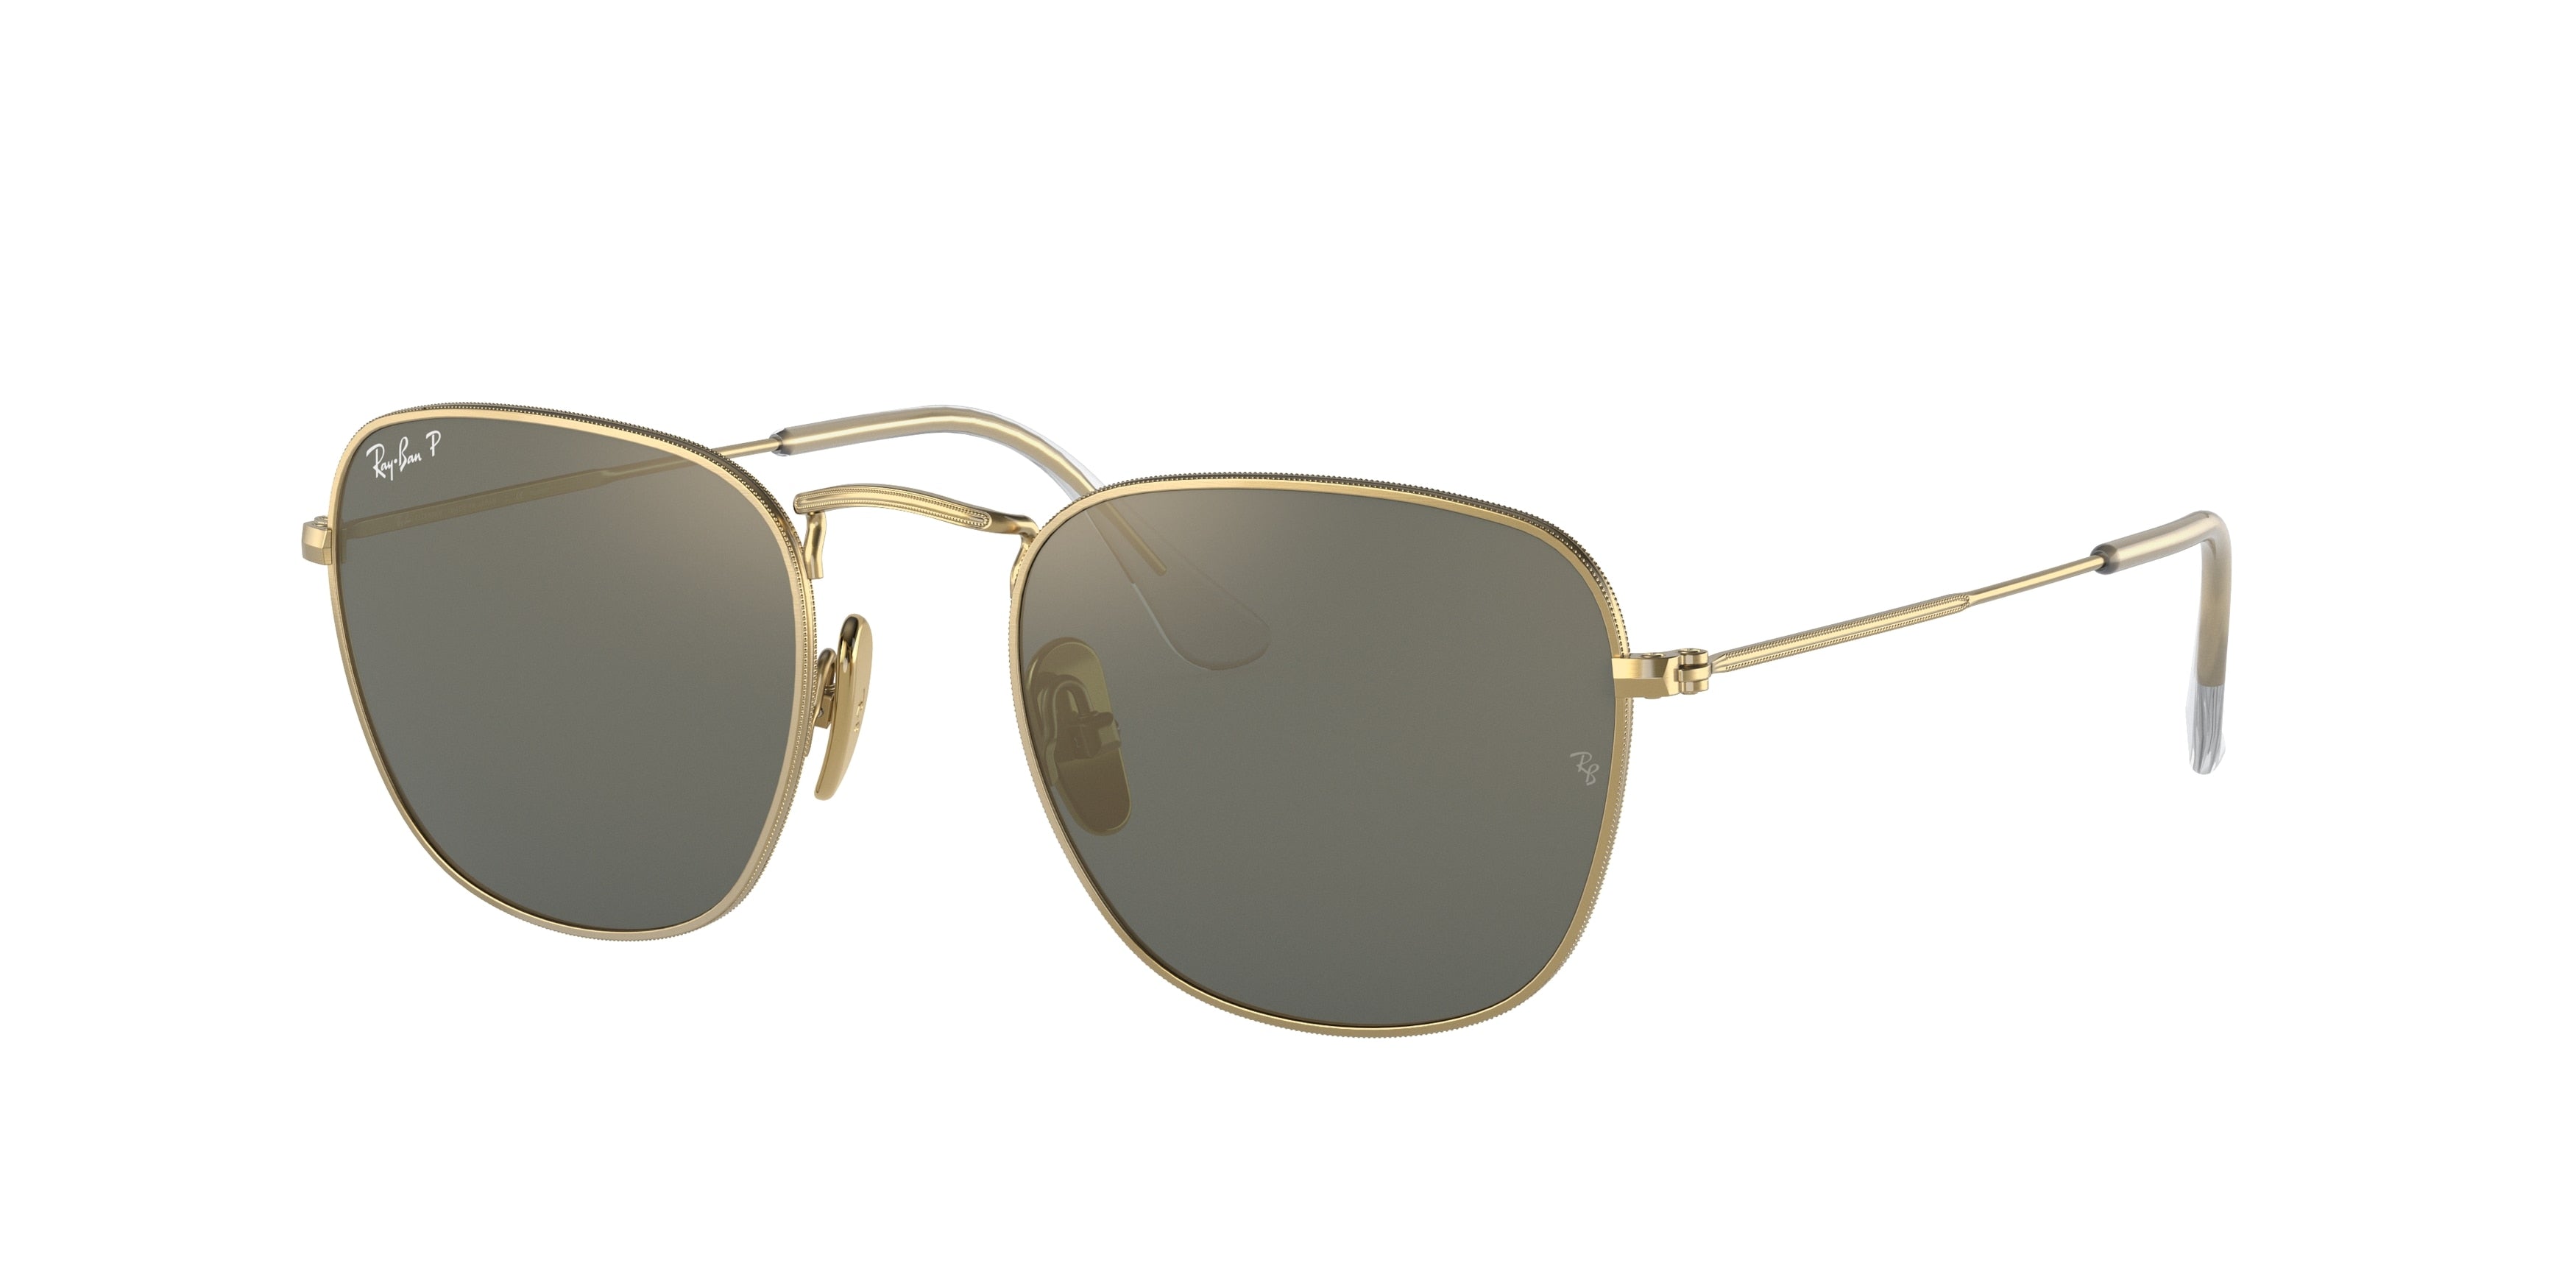 Ray-Ban FRANK RB8157 Square Sunglasses  9217T0-Gold 51-145-20 - Color Map Gold